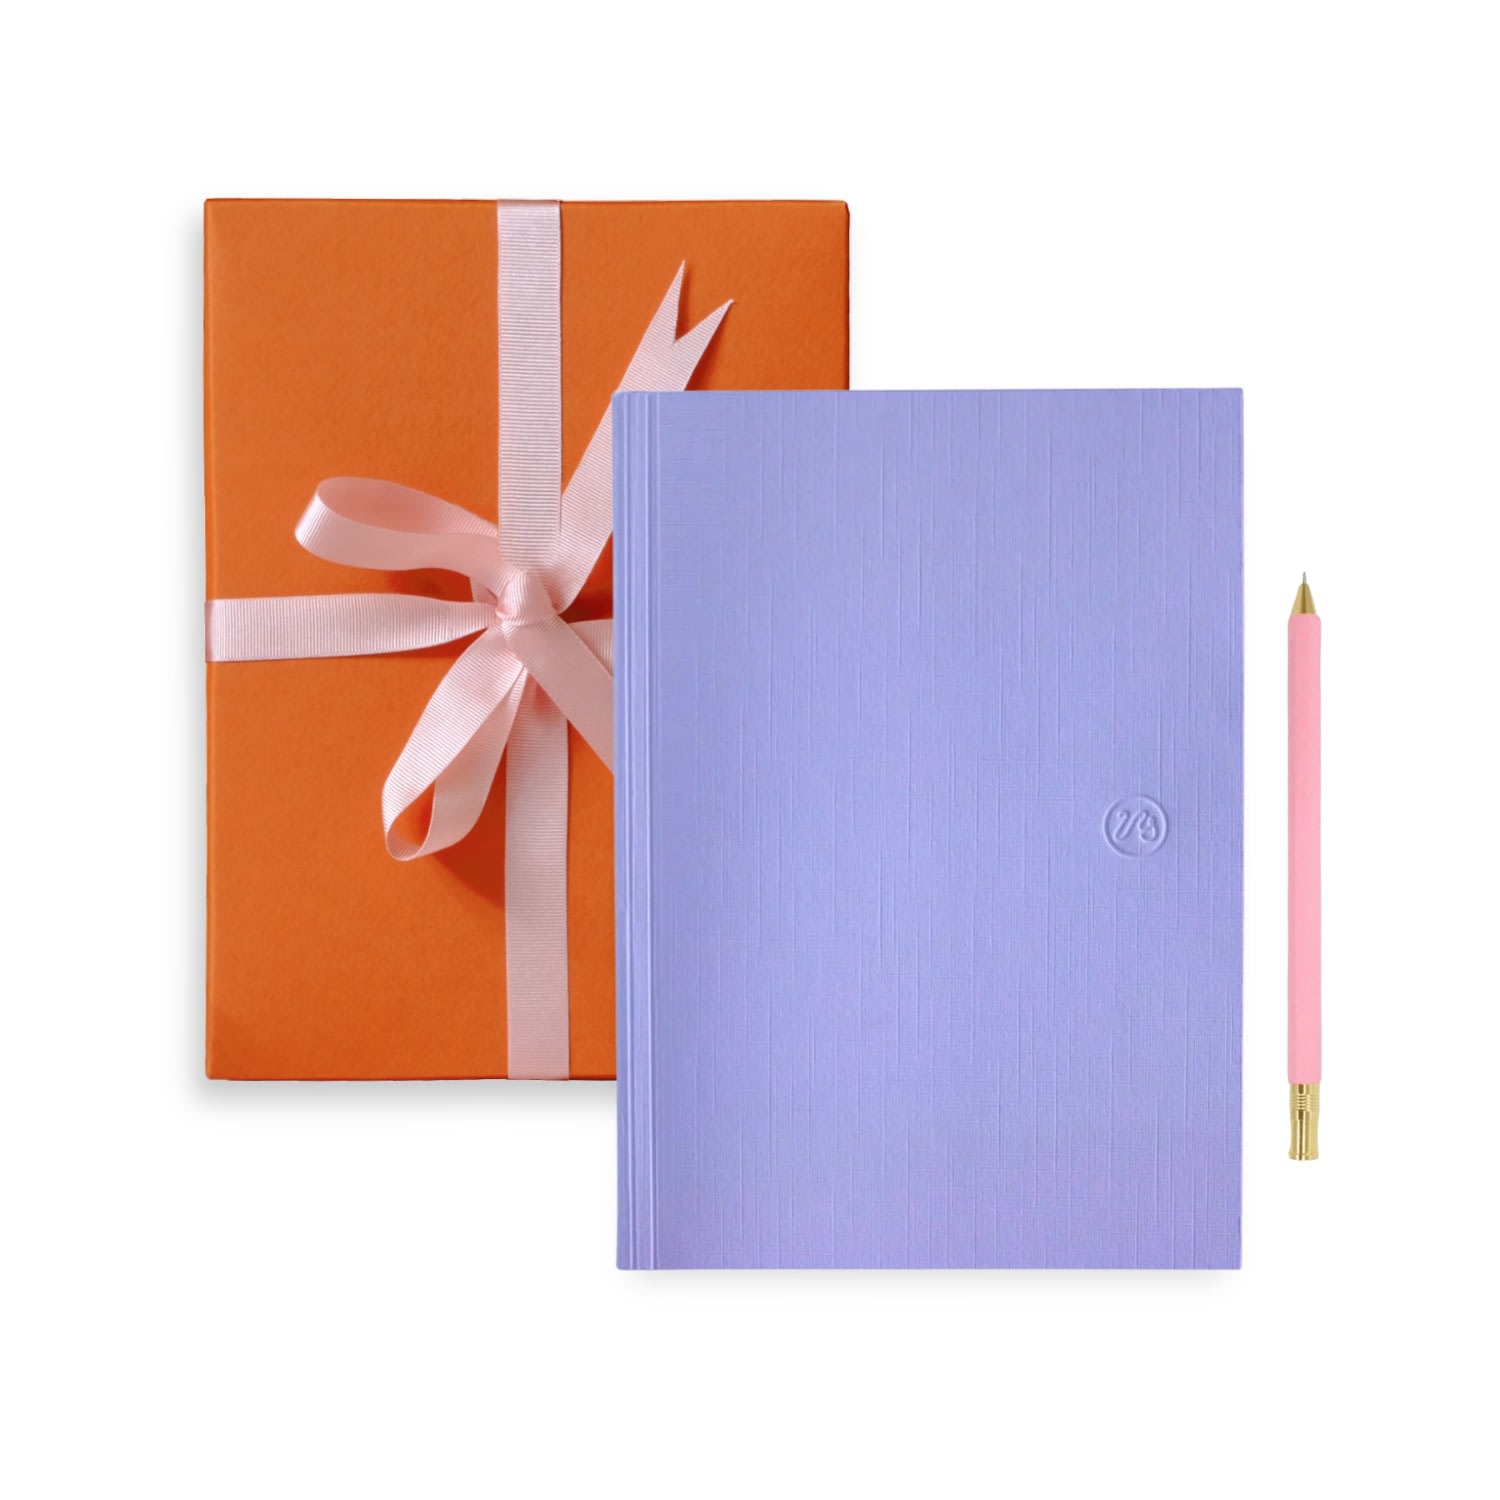 Pink / Purple Marais Notebook & Pen Duo - Everyday Pen / Ruled Paper One Size Papersmiths